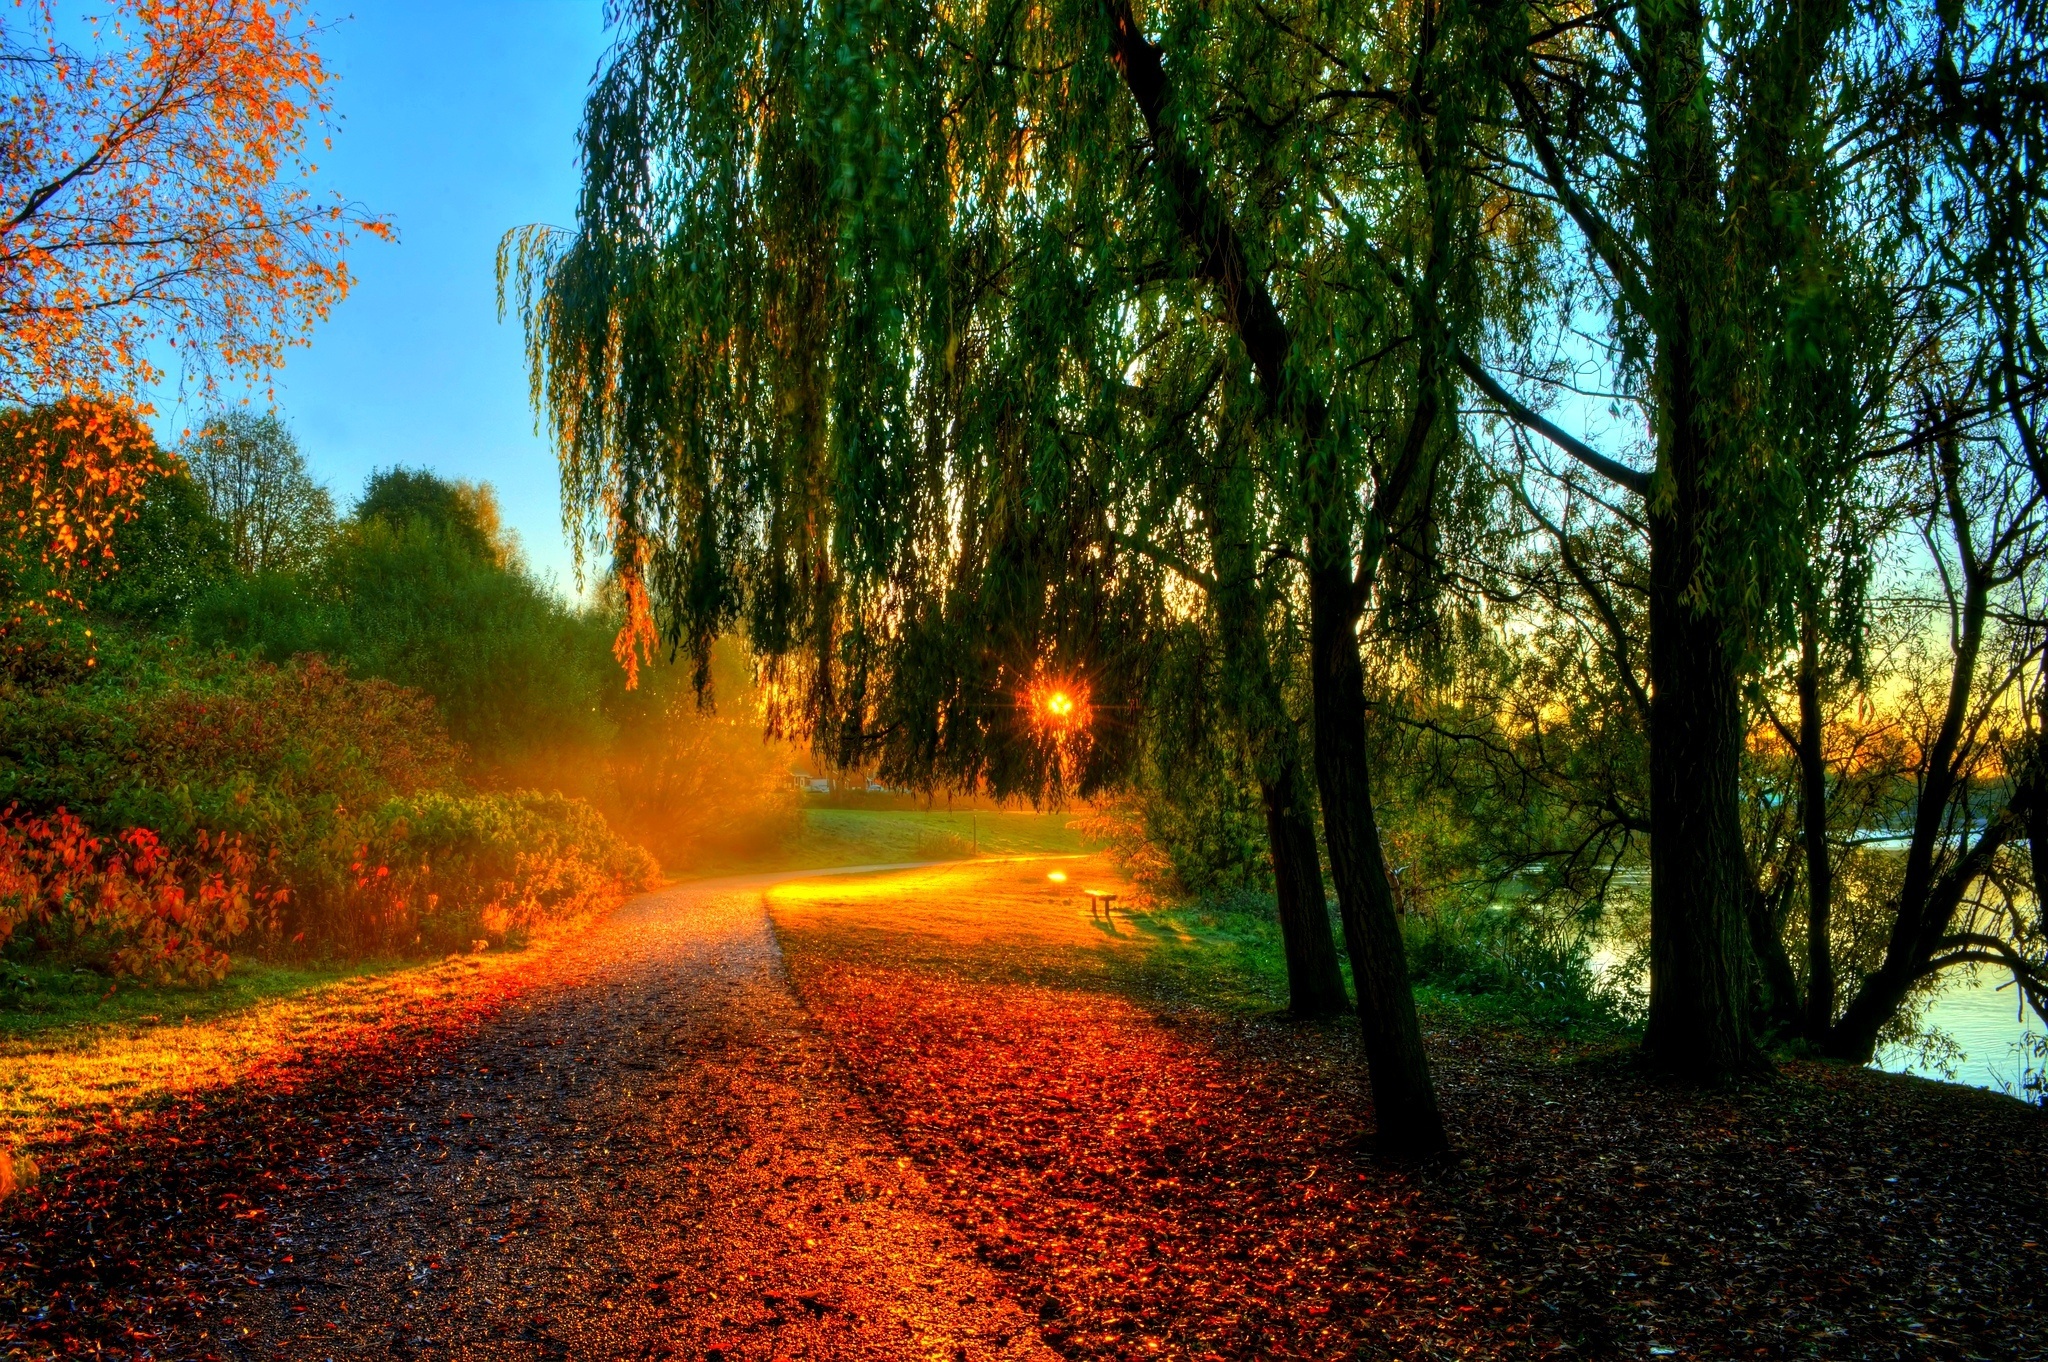 rays, Bench, Forest, Trees, Autumn, Leaves, Hdr, Walk, Sun, Sunset, Hdr Wallpaper